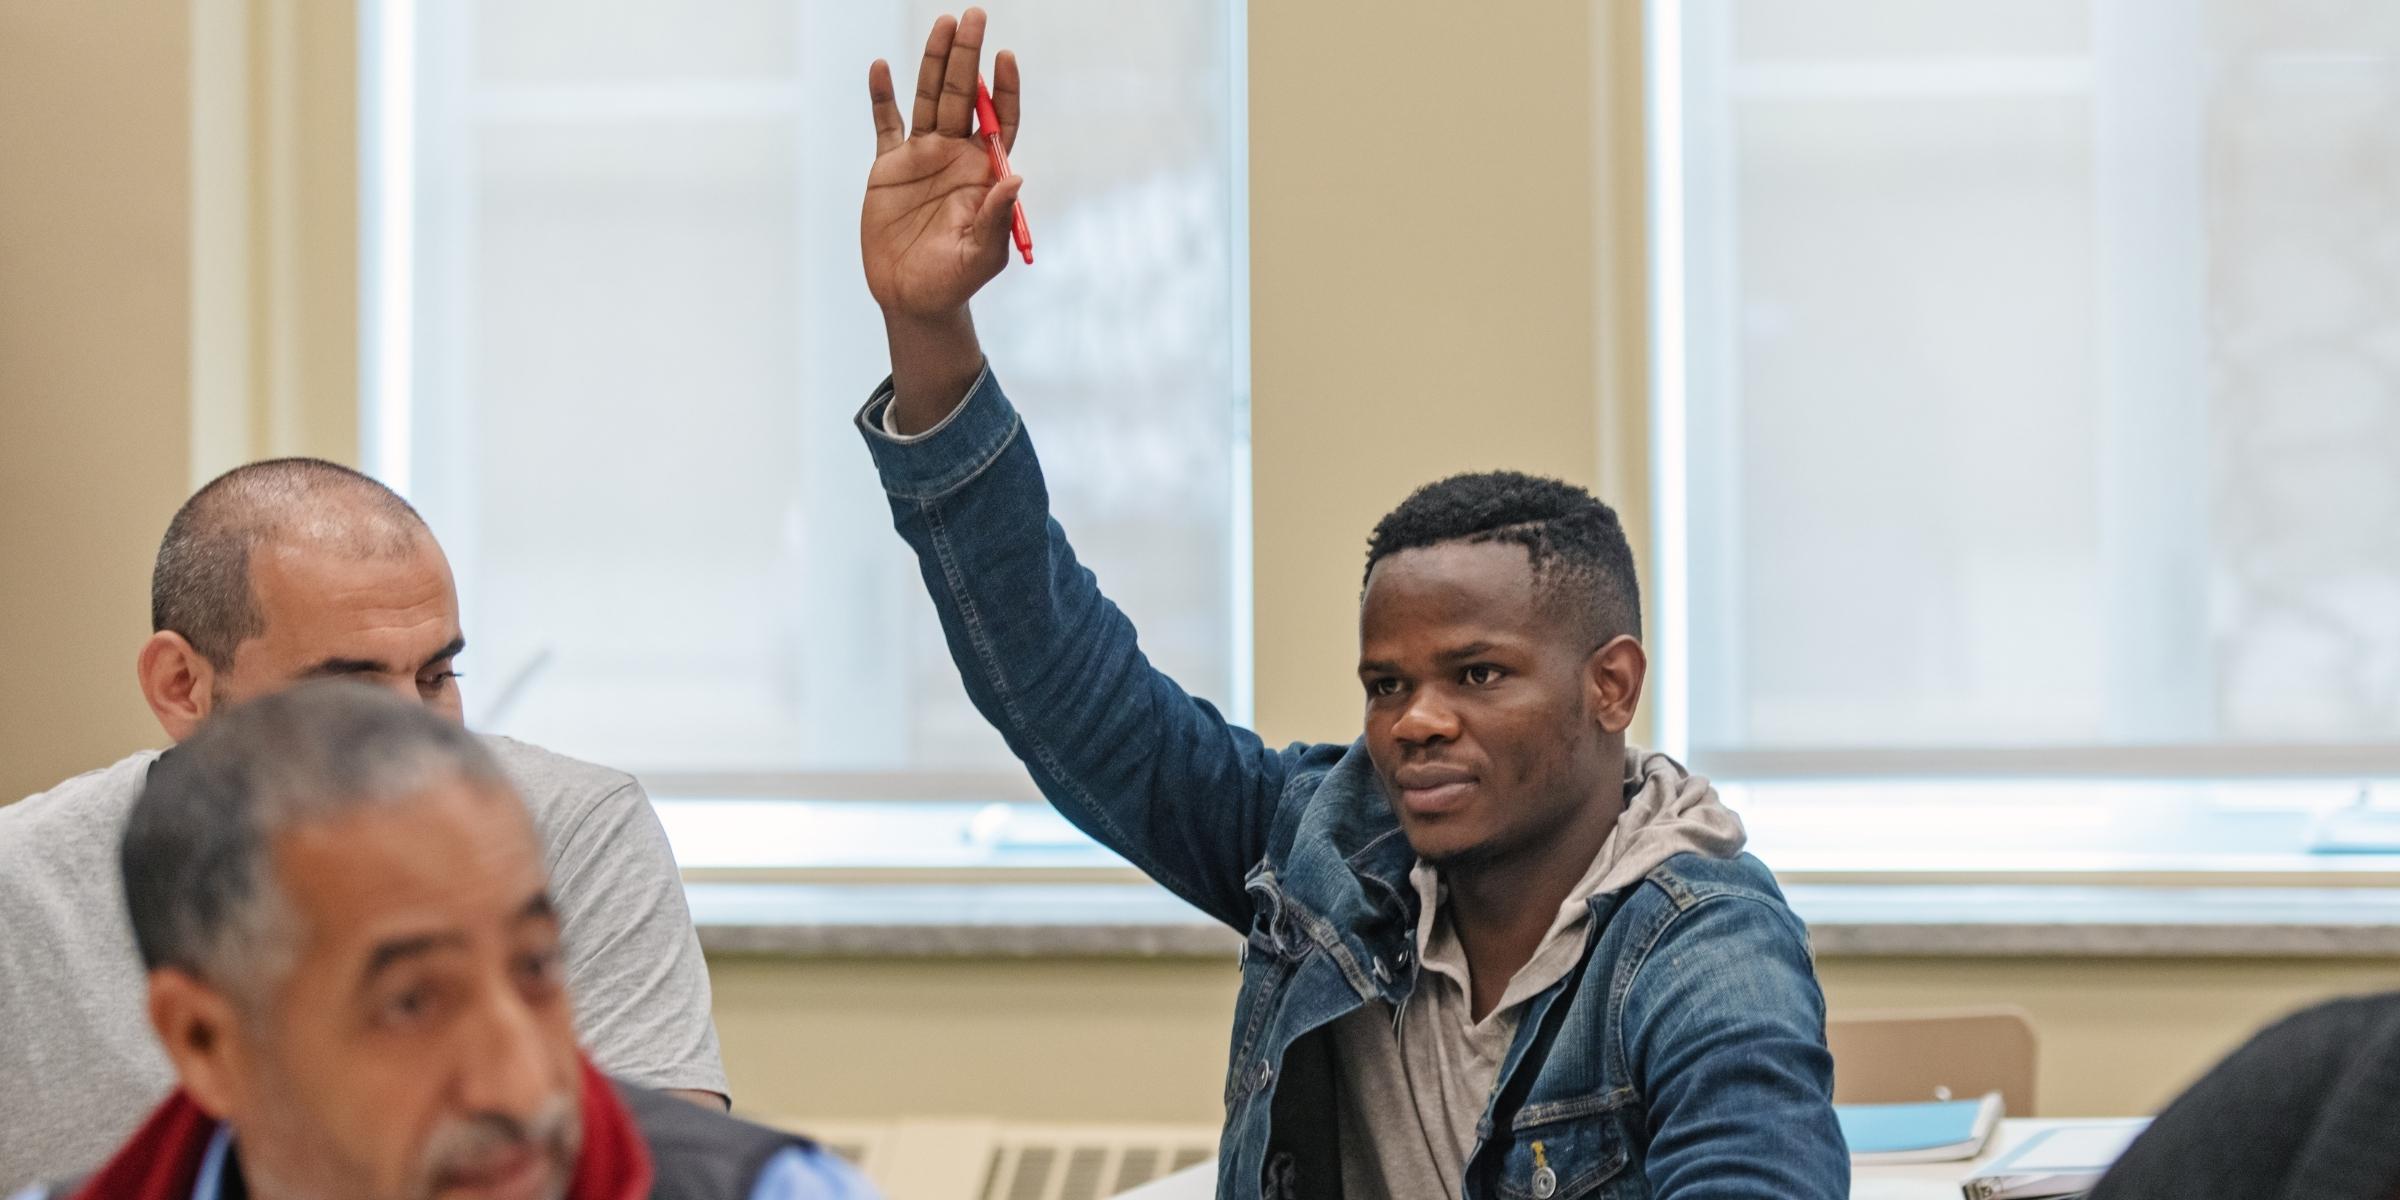 an adult student raising their hand inside a classroom with other adult learners